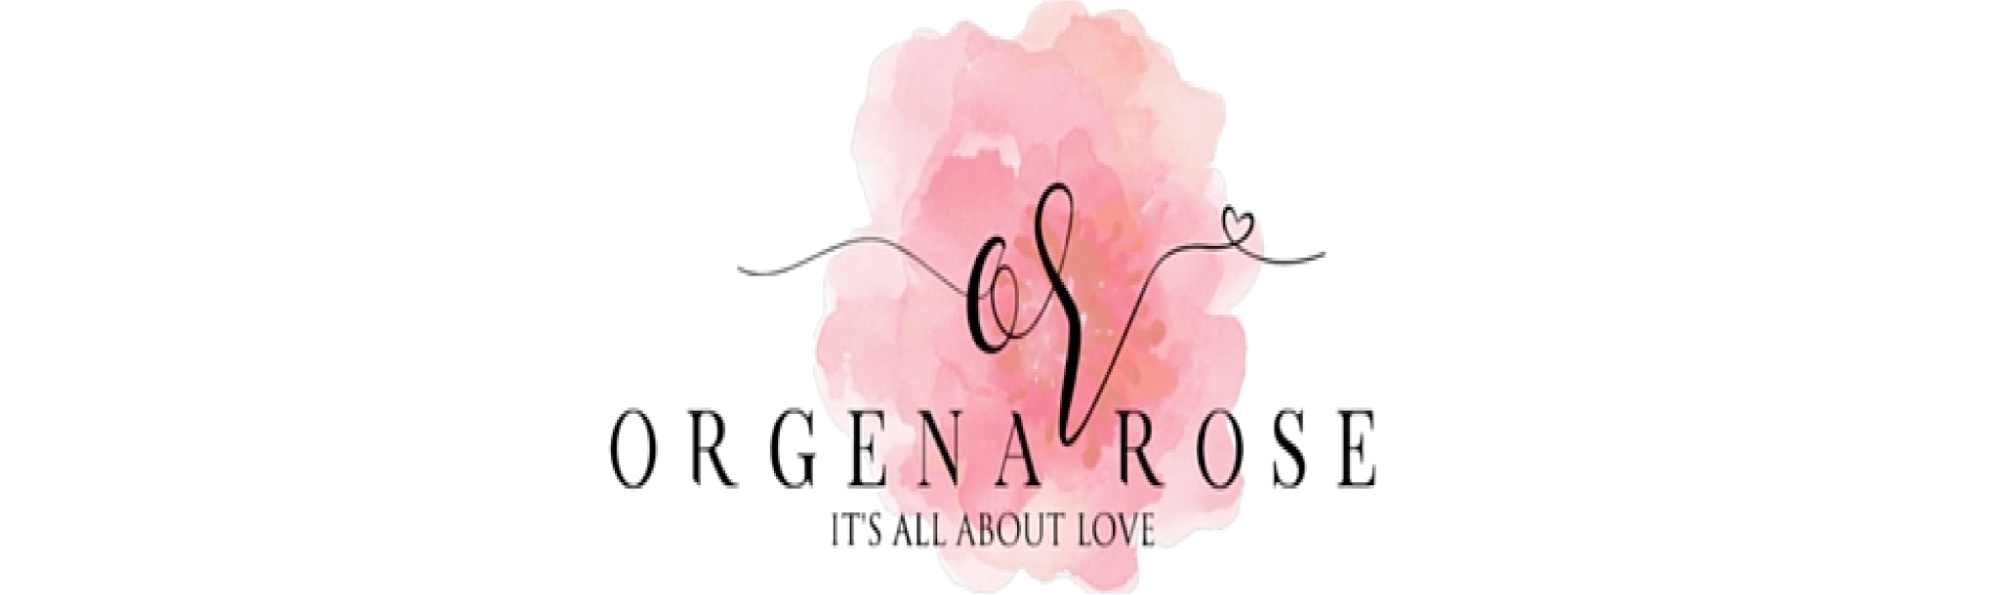 Orgena Rose - It's All About Love www.orgenarose.com